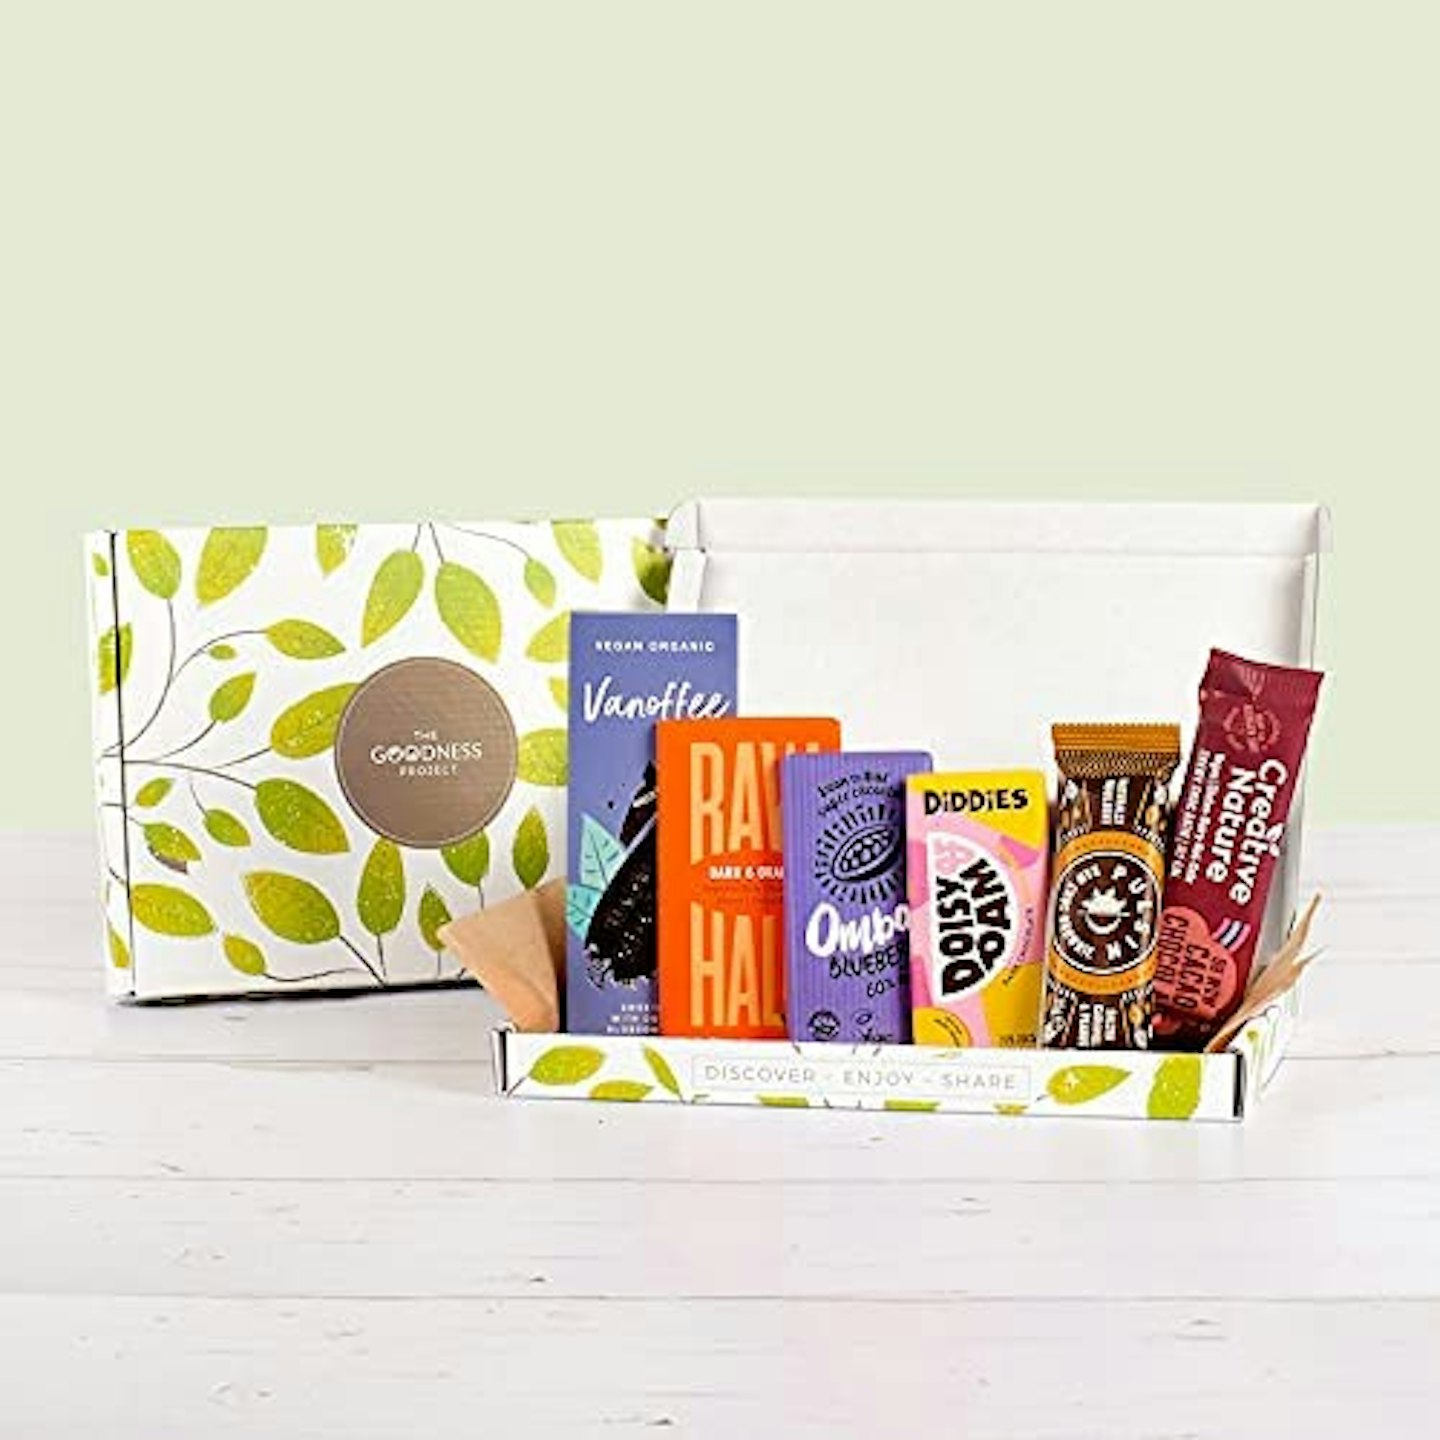 The Goodness Project Vegan Chocolate and Snack Letterbox Gift